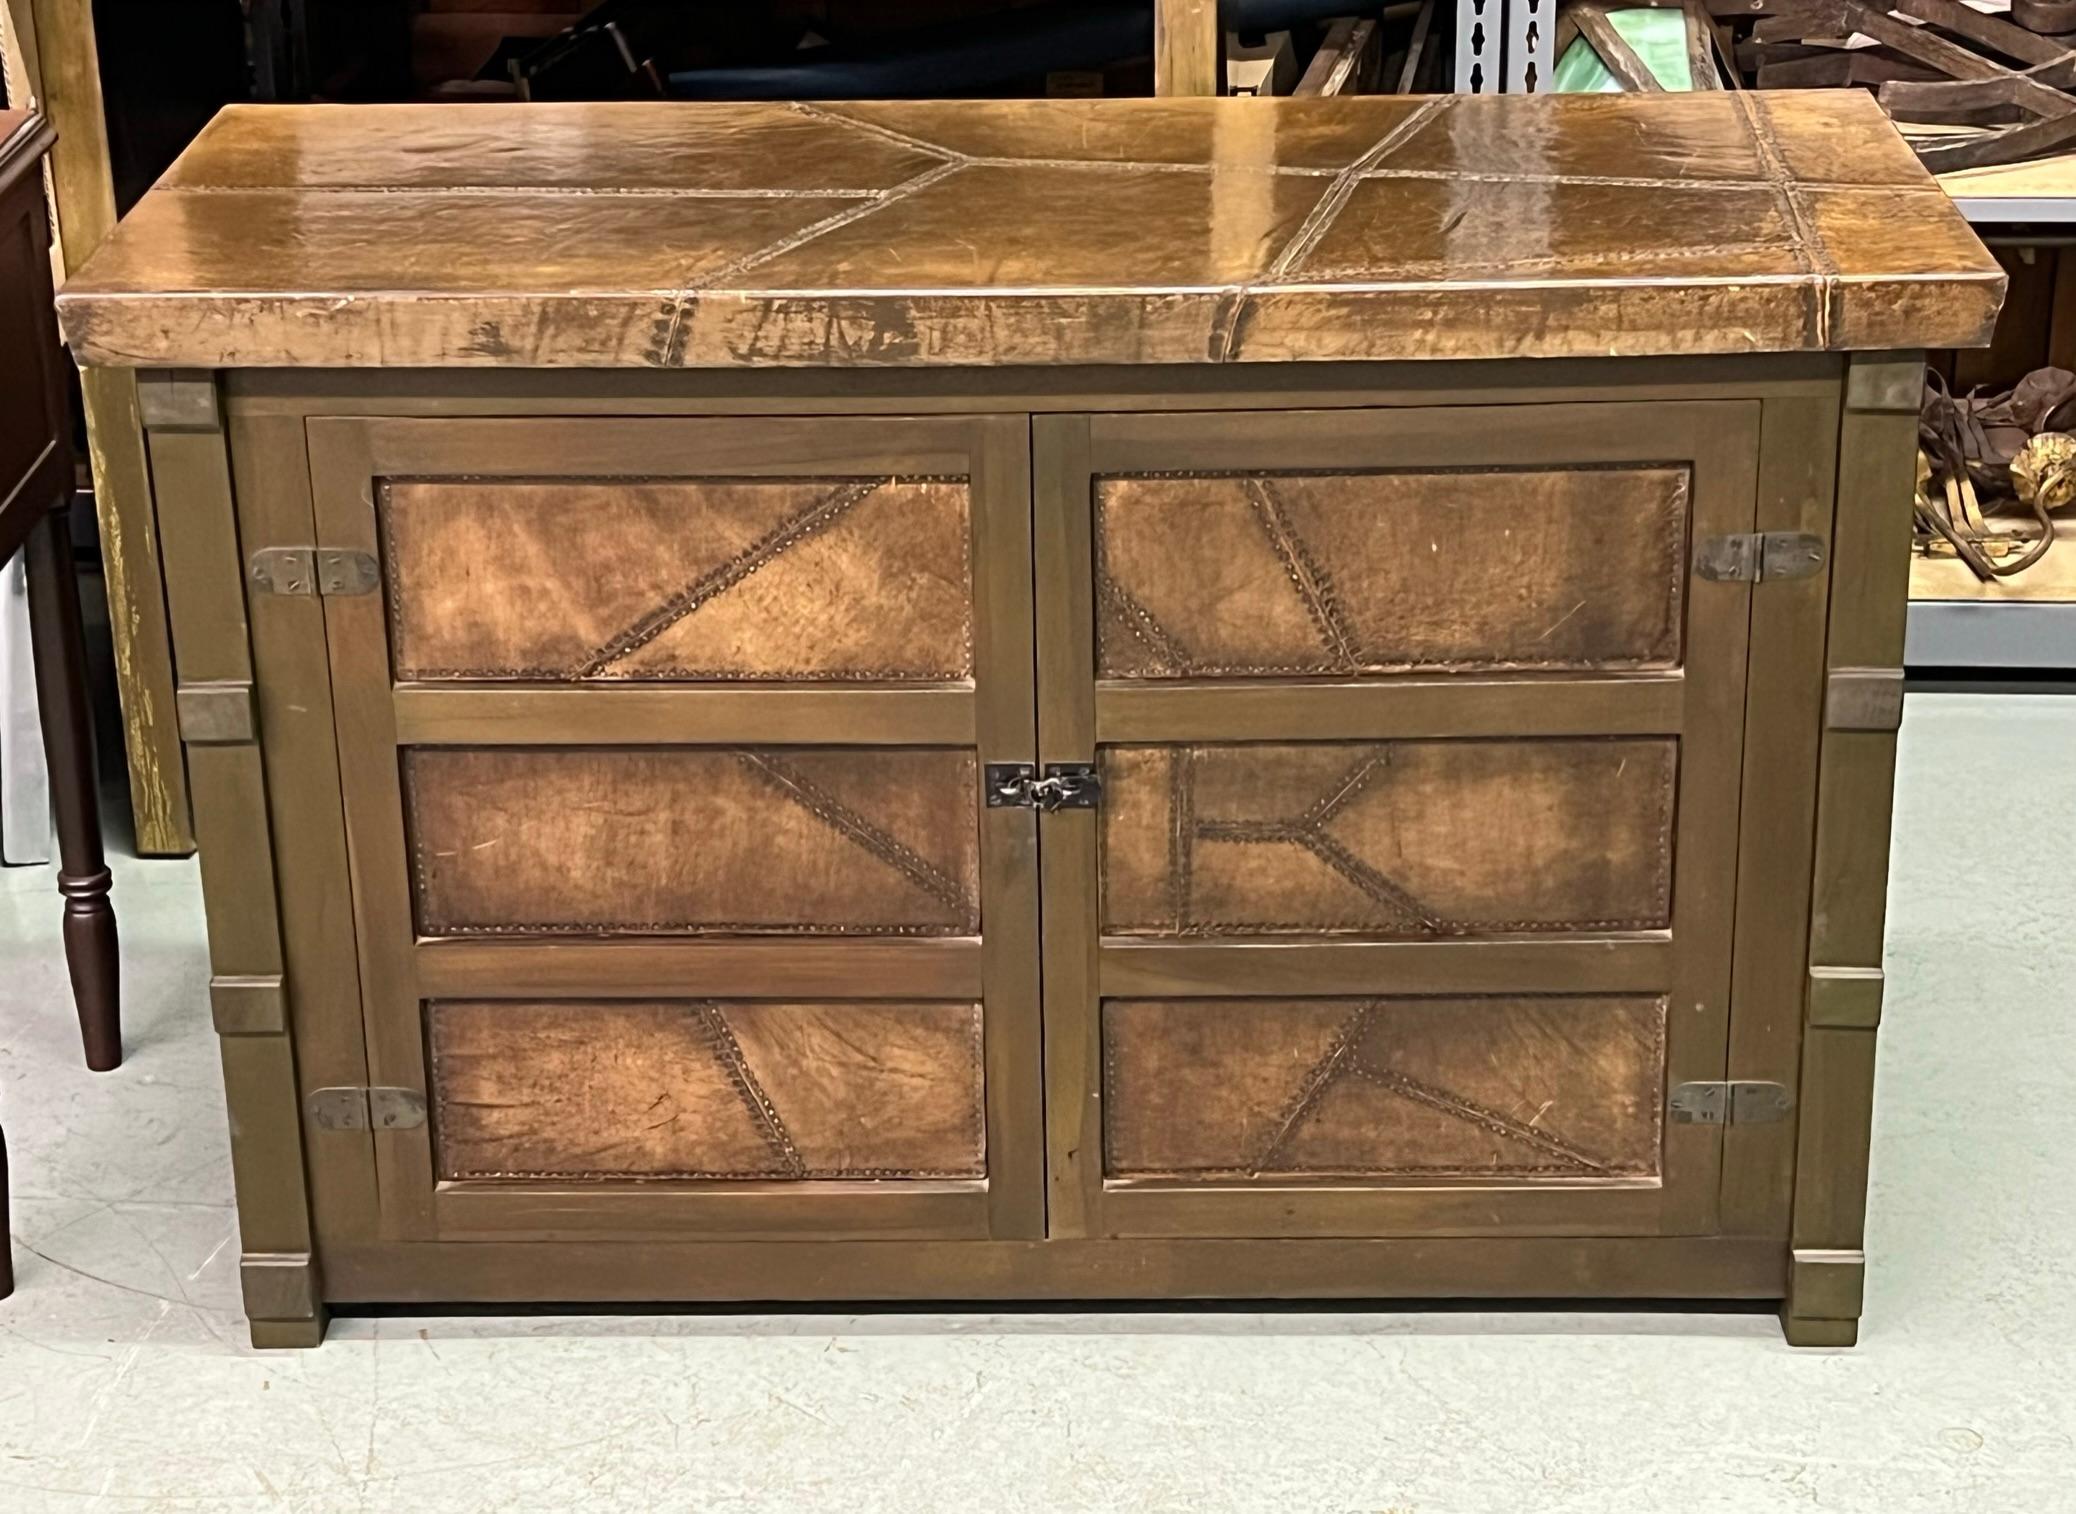 A Rare French Art Deco style cabinet / Buffet in the style of Jean-Michel Frank. The piece was likely made as a commission by a small workshop as it is a 1 of a kind piece. It is unique in that it combines modernism with a rustic sensibility. It